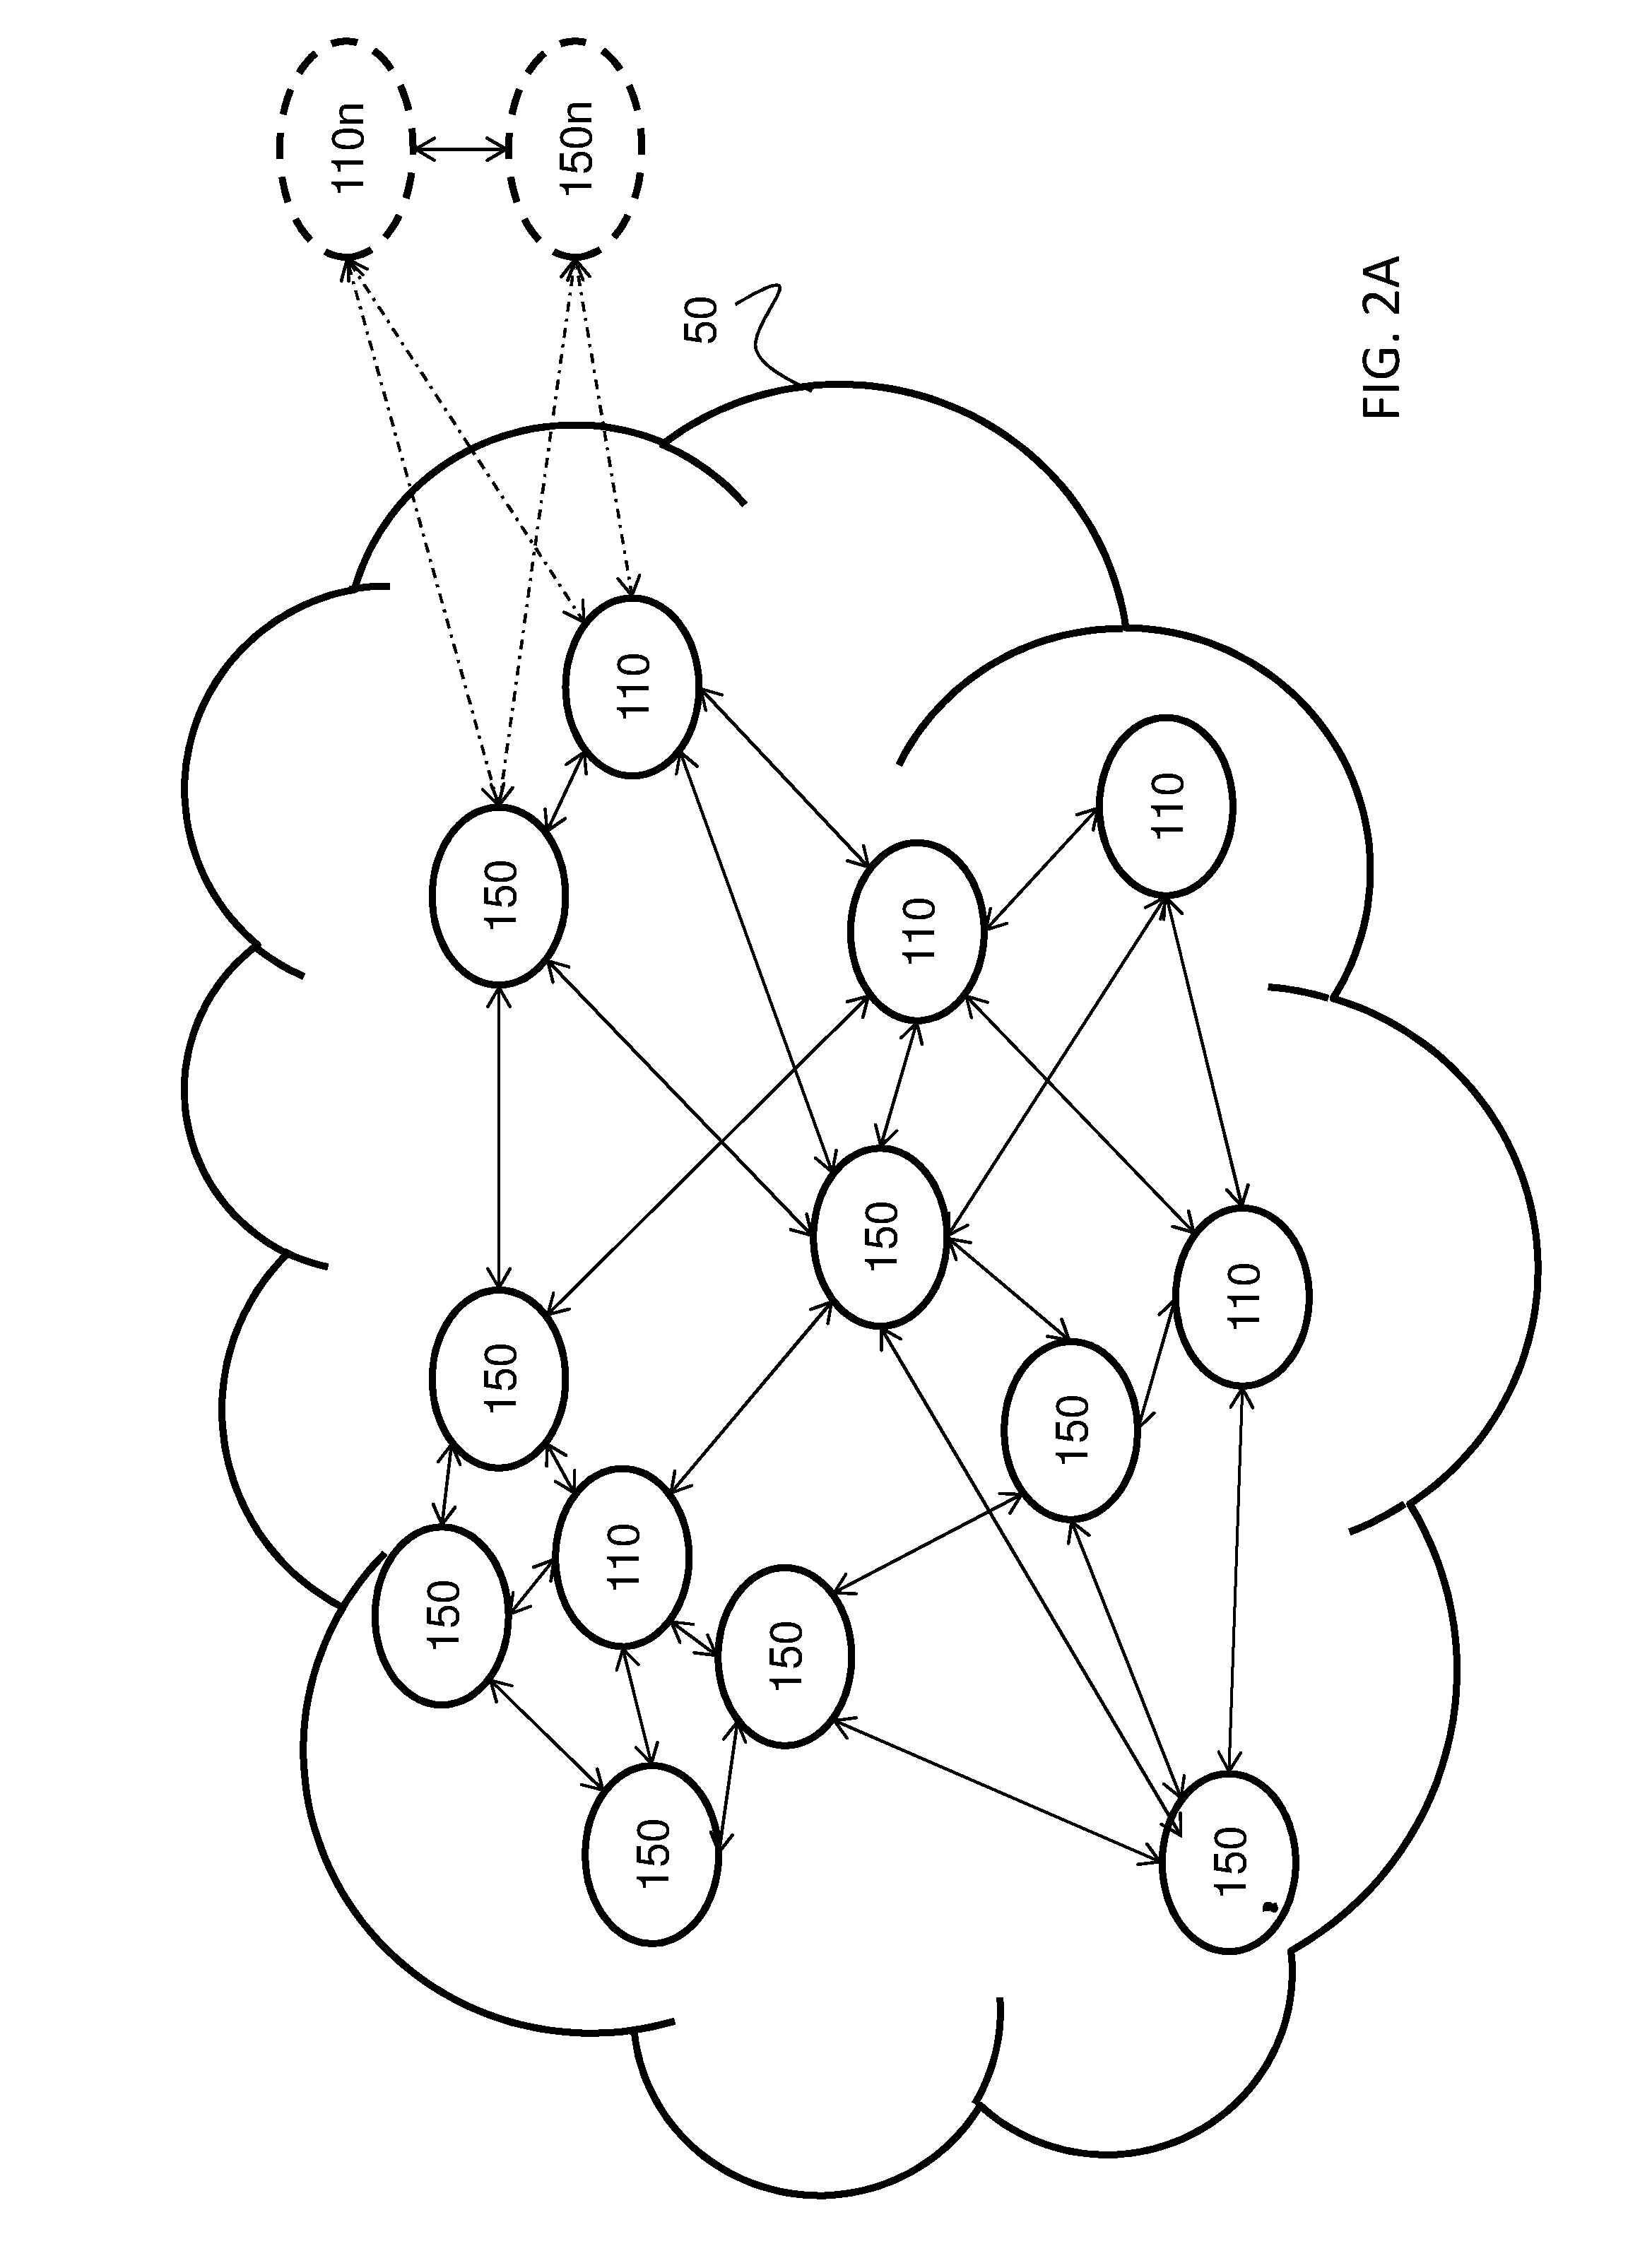 System, device and method for the prevention of friendly fire incidents